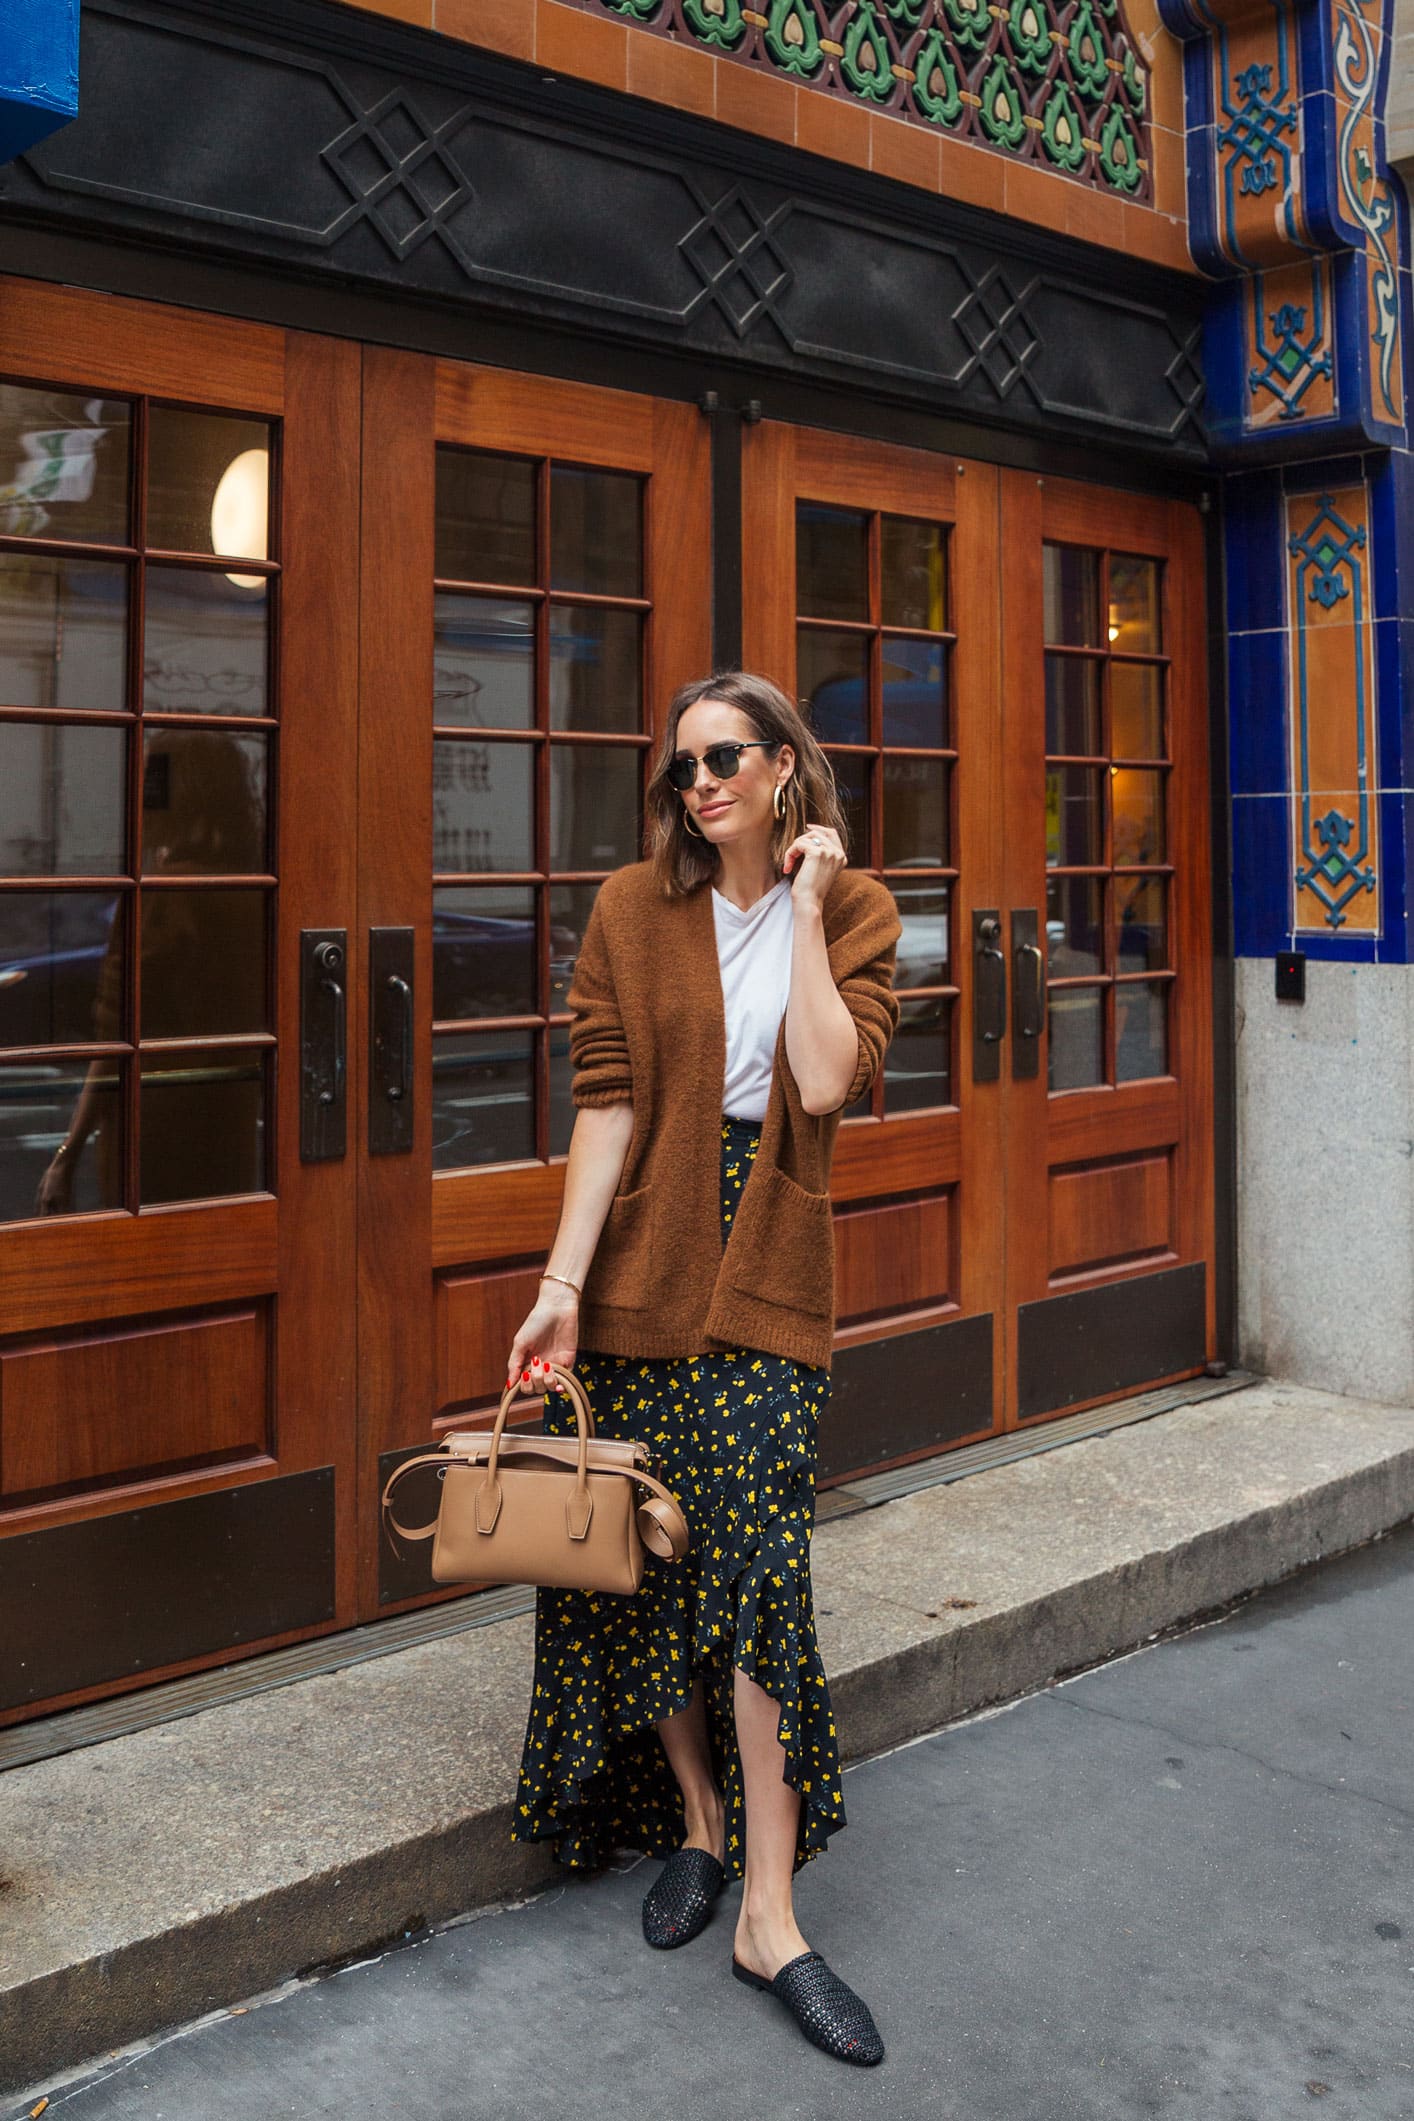 Louise Roe Instagram Guide to NYC